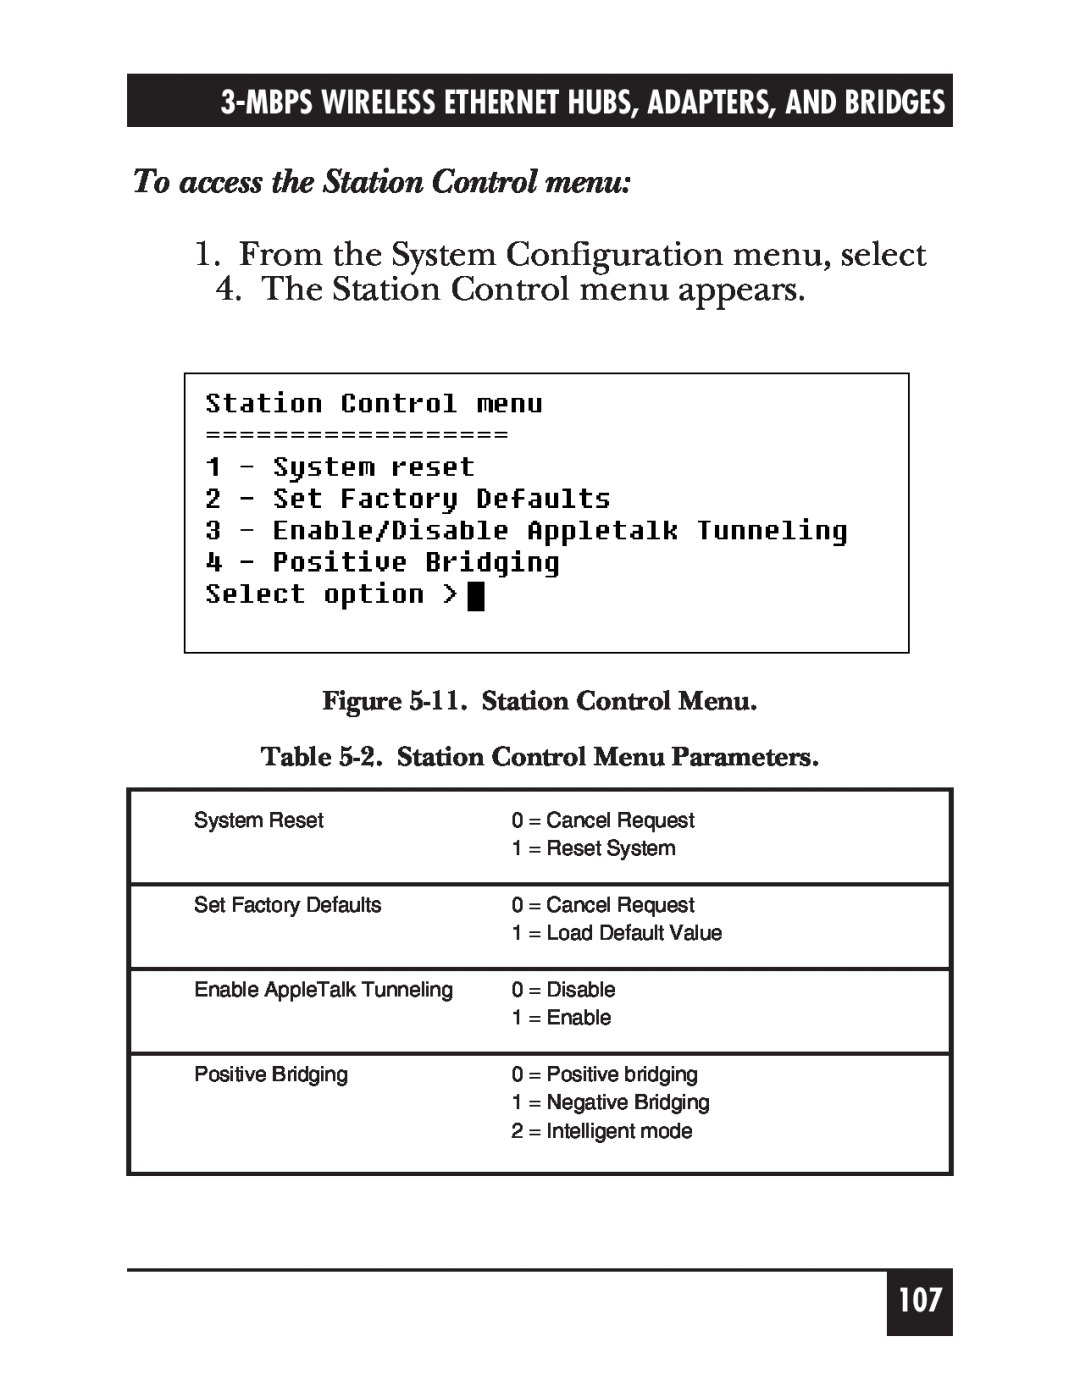 Black Box LW005A To access the Station Control menu, From the System Configuration menu, select, 11. Station Control Menu 